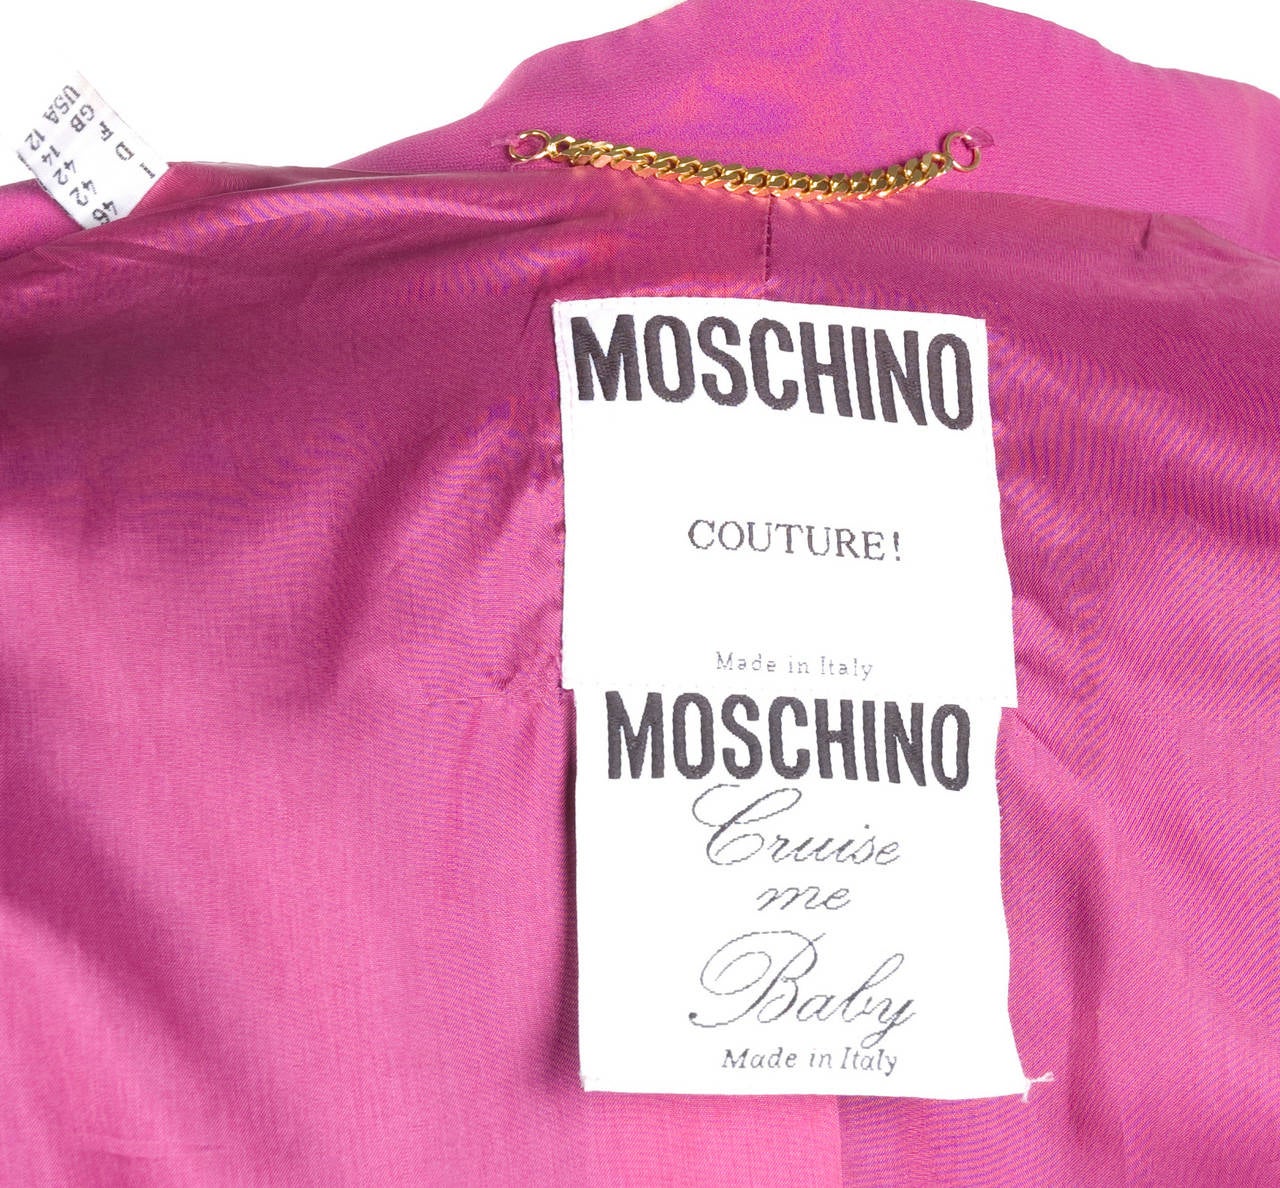 Moschino Couture Dress and Jacket For Sale 5